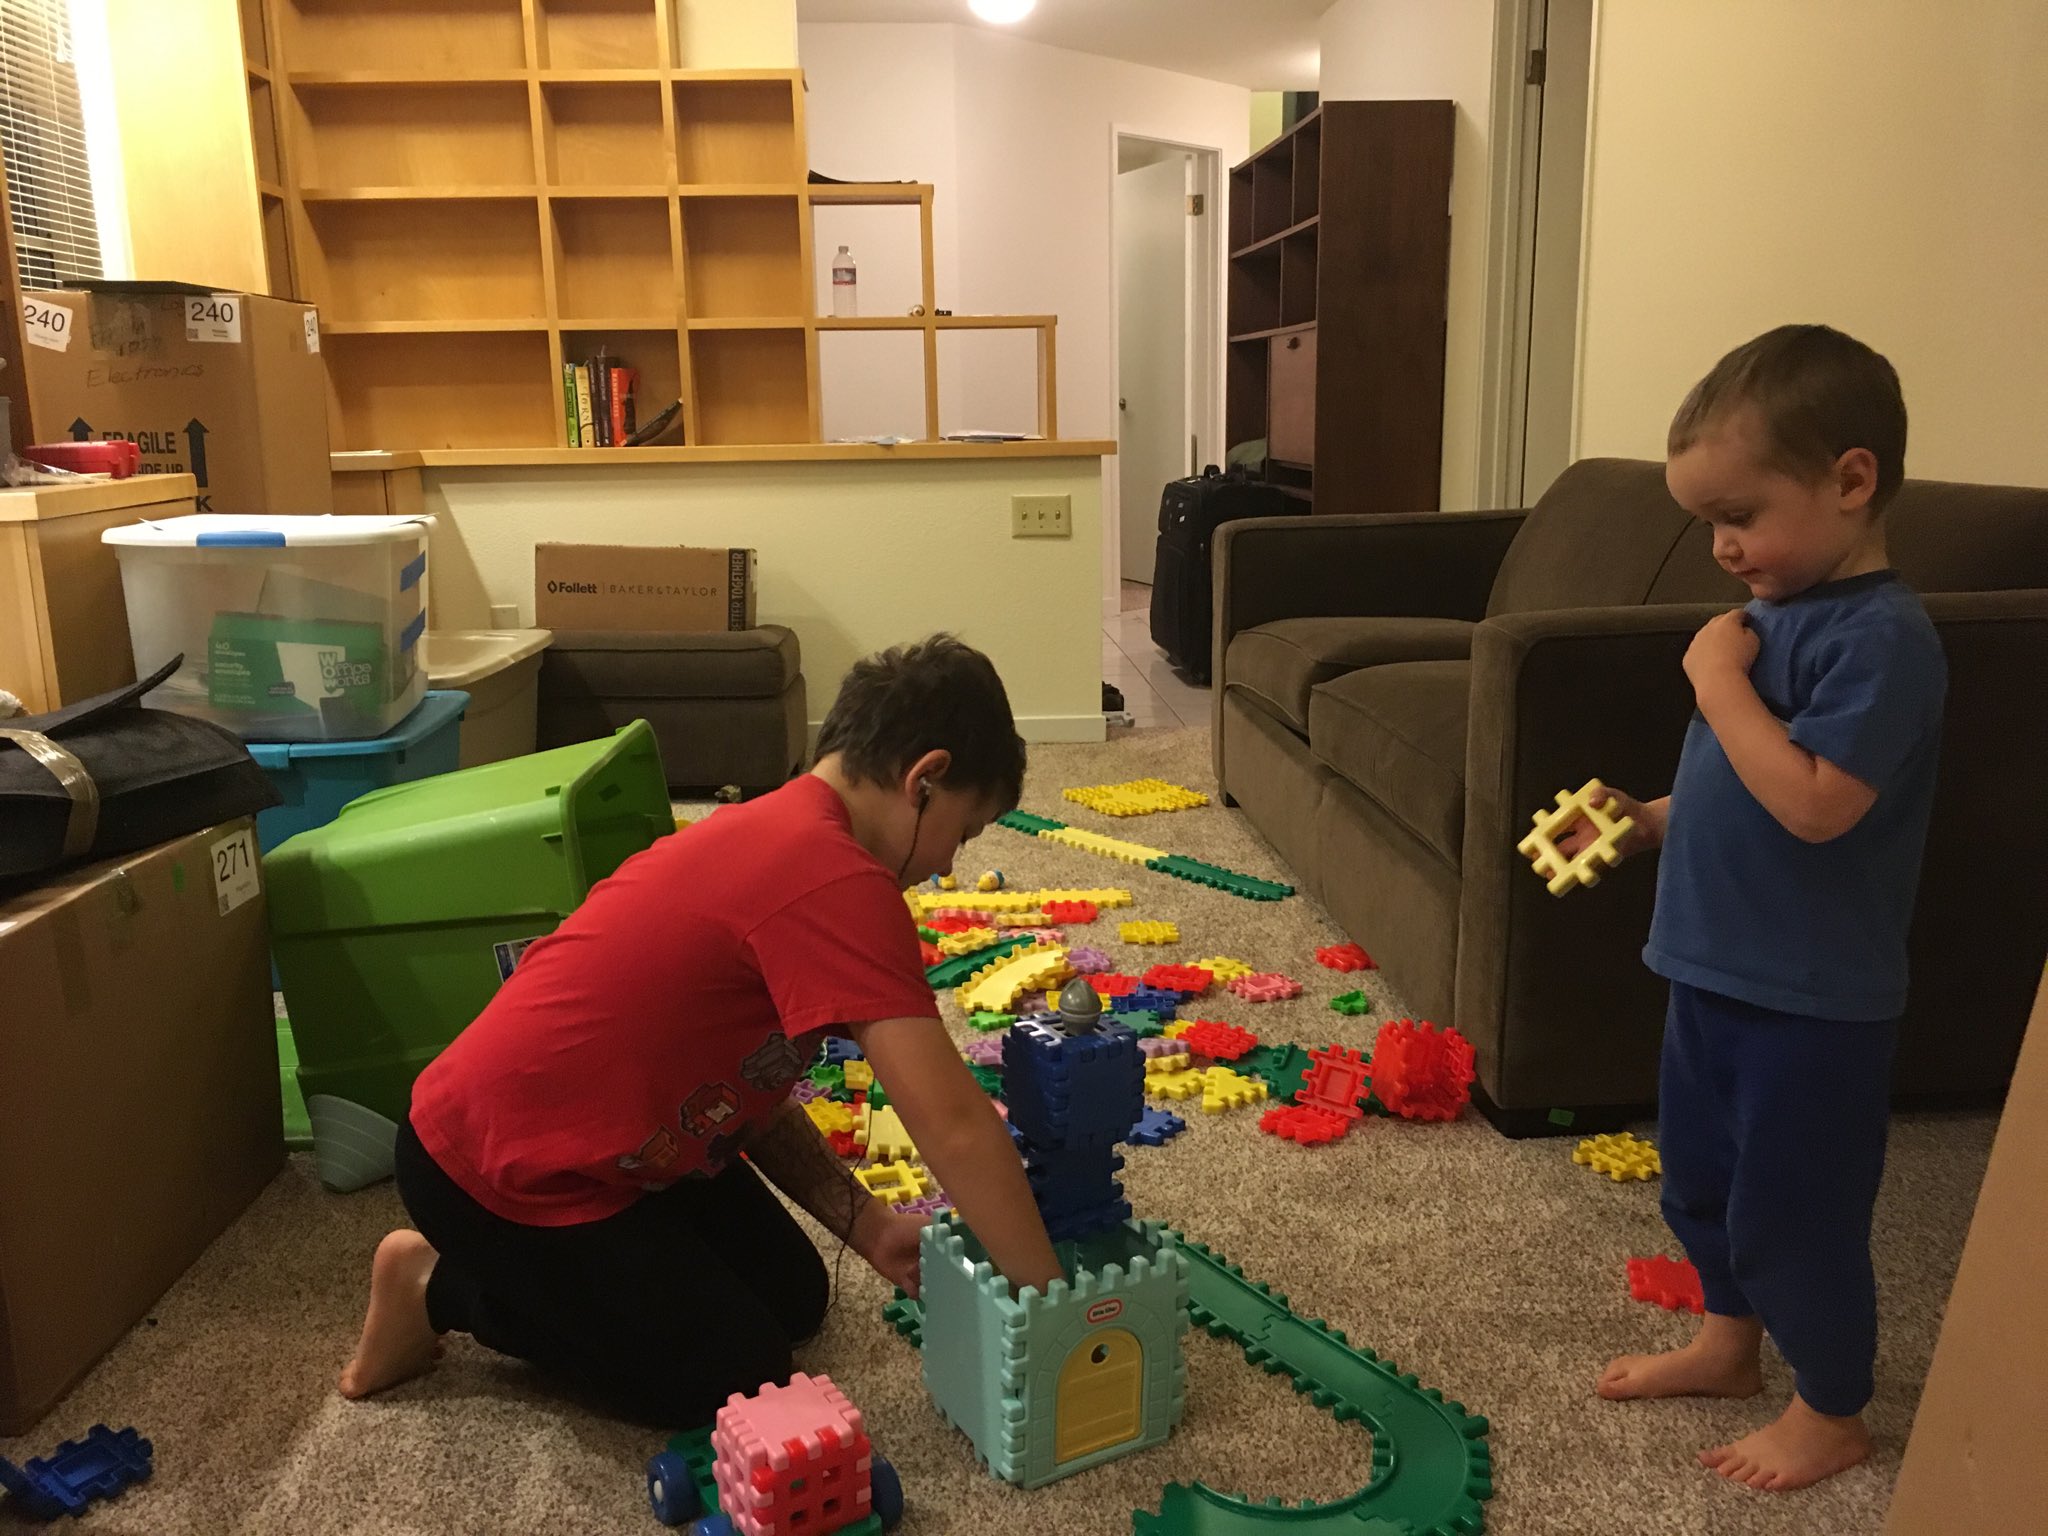 The family room is cluttered with boxes and bins from moving. In the middle of the floor Calvin is playing with waffle blocks while Julian looks on.